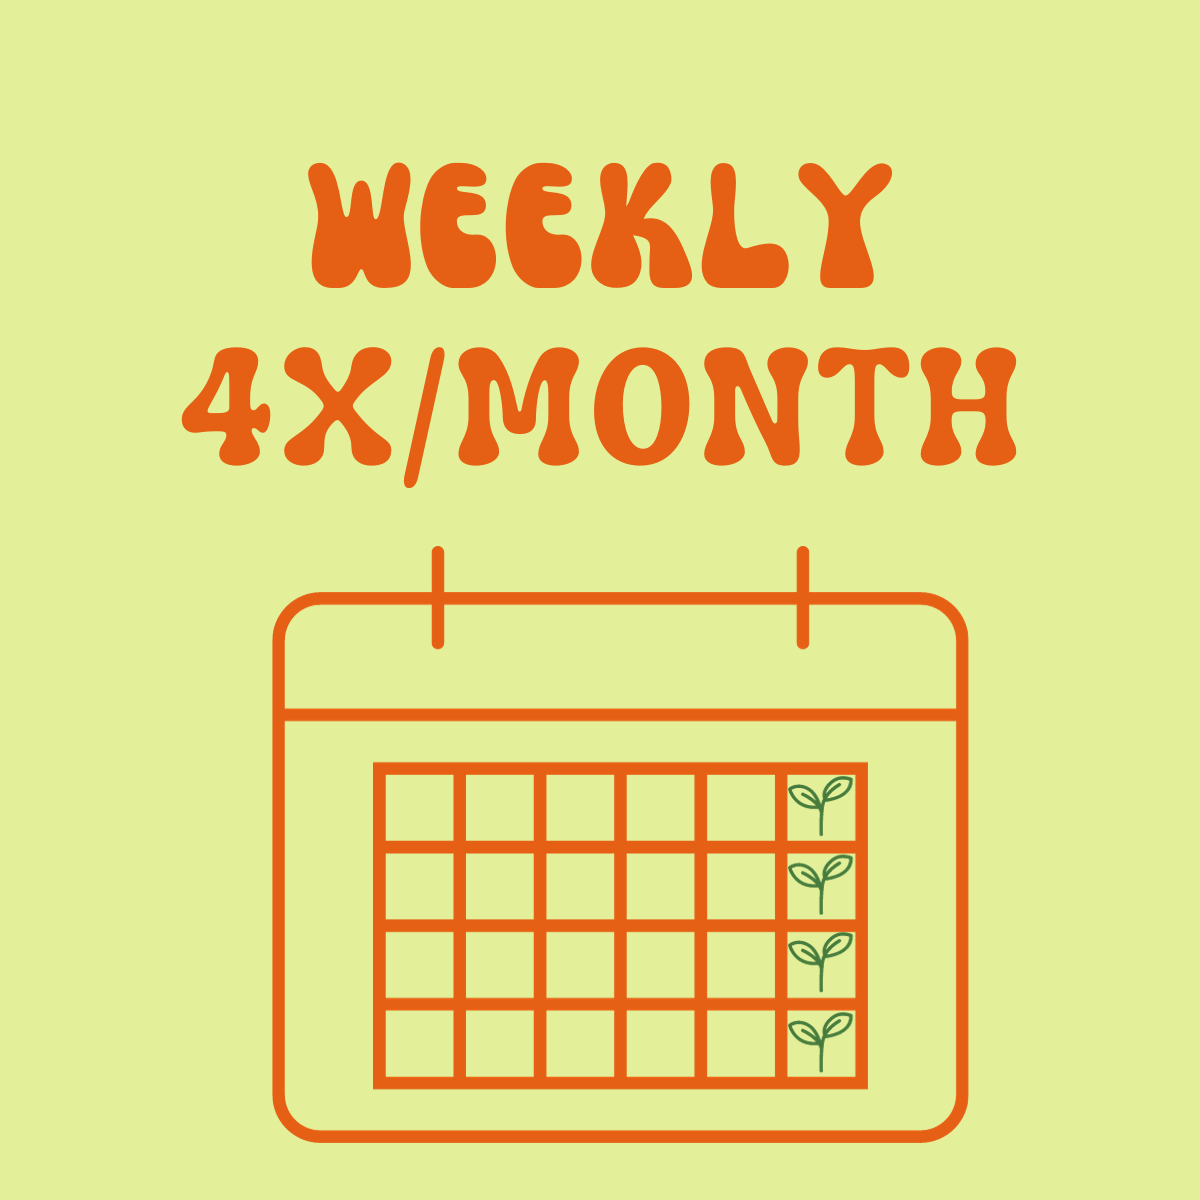 Weekly Subscription (4x/month)